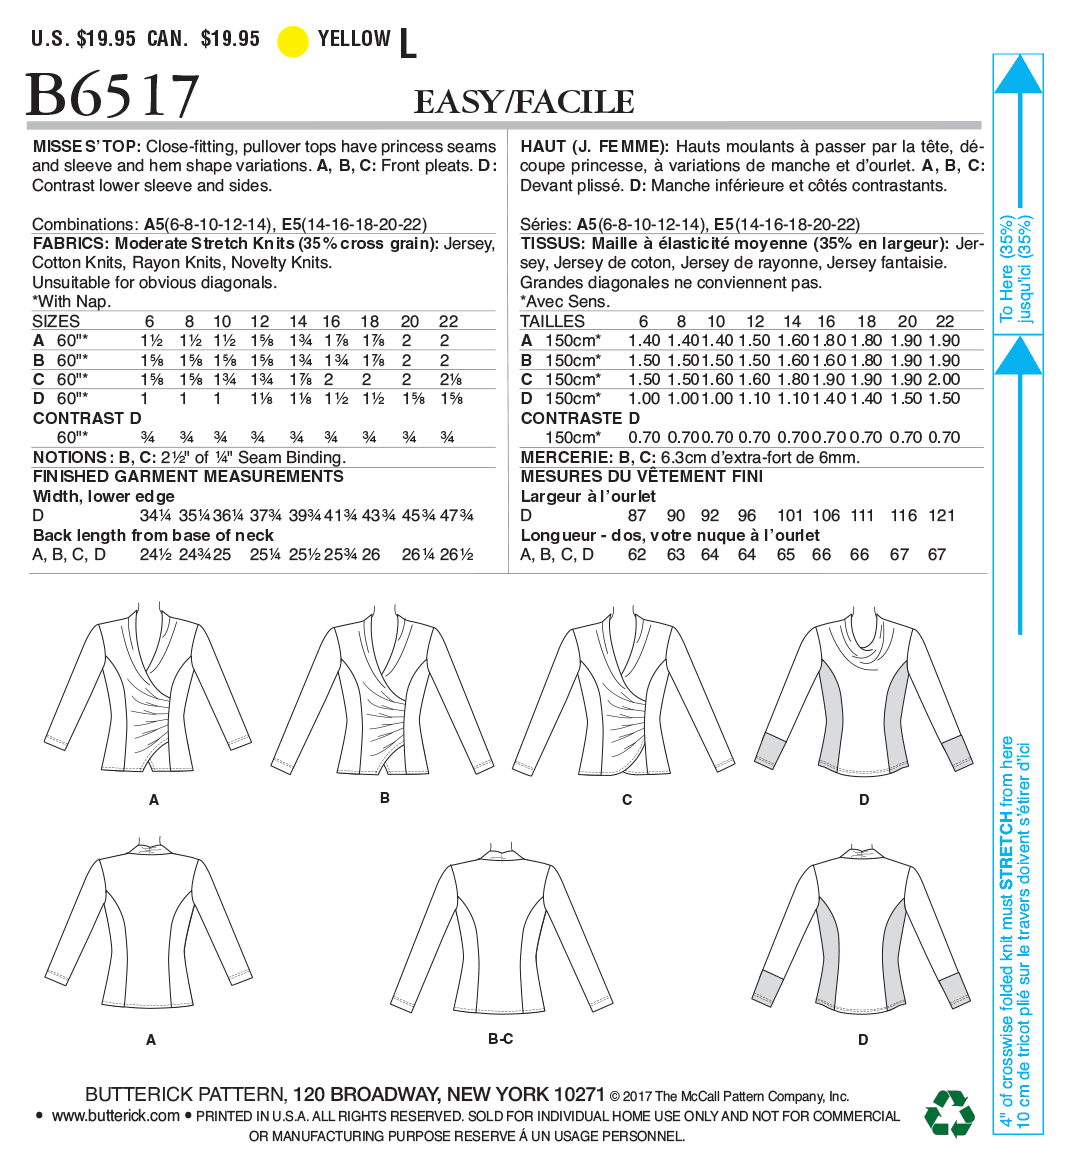 Butterick Sewing Pattern B6517 Misses' Top with Pleat and Options